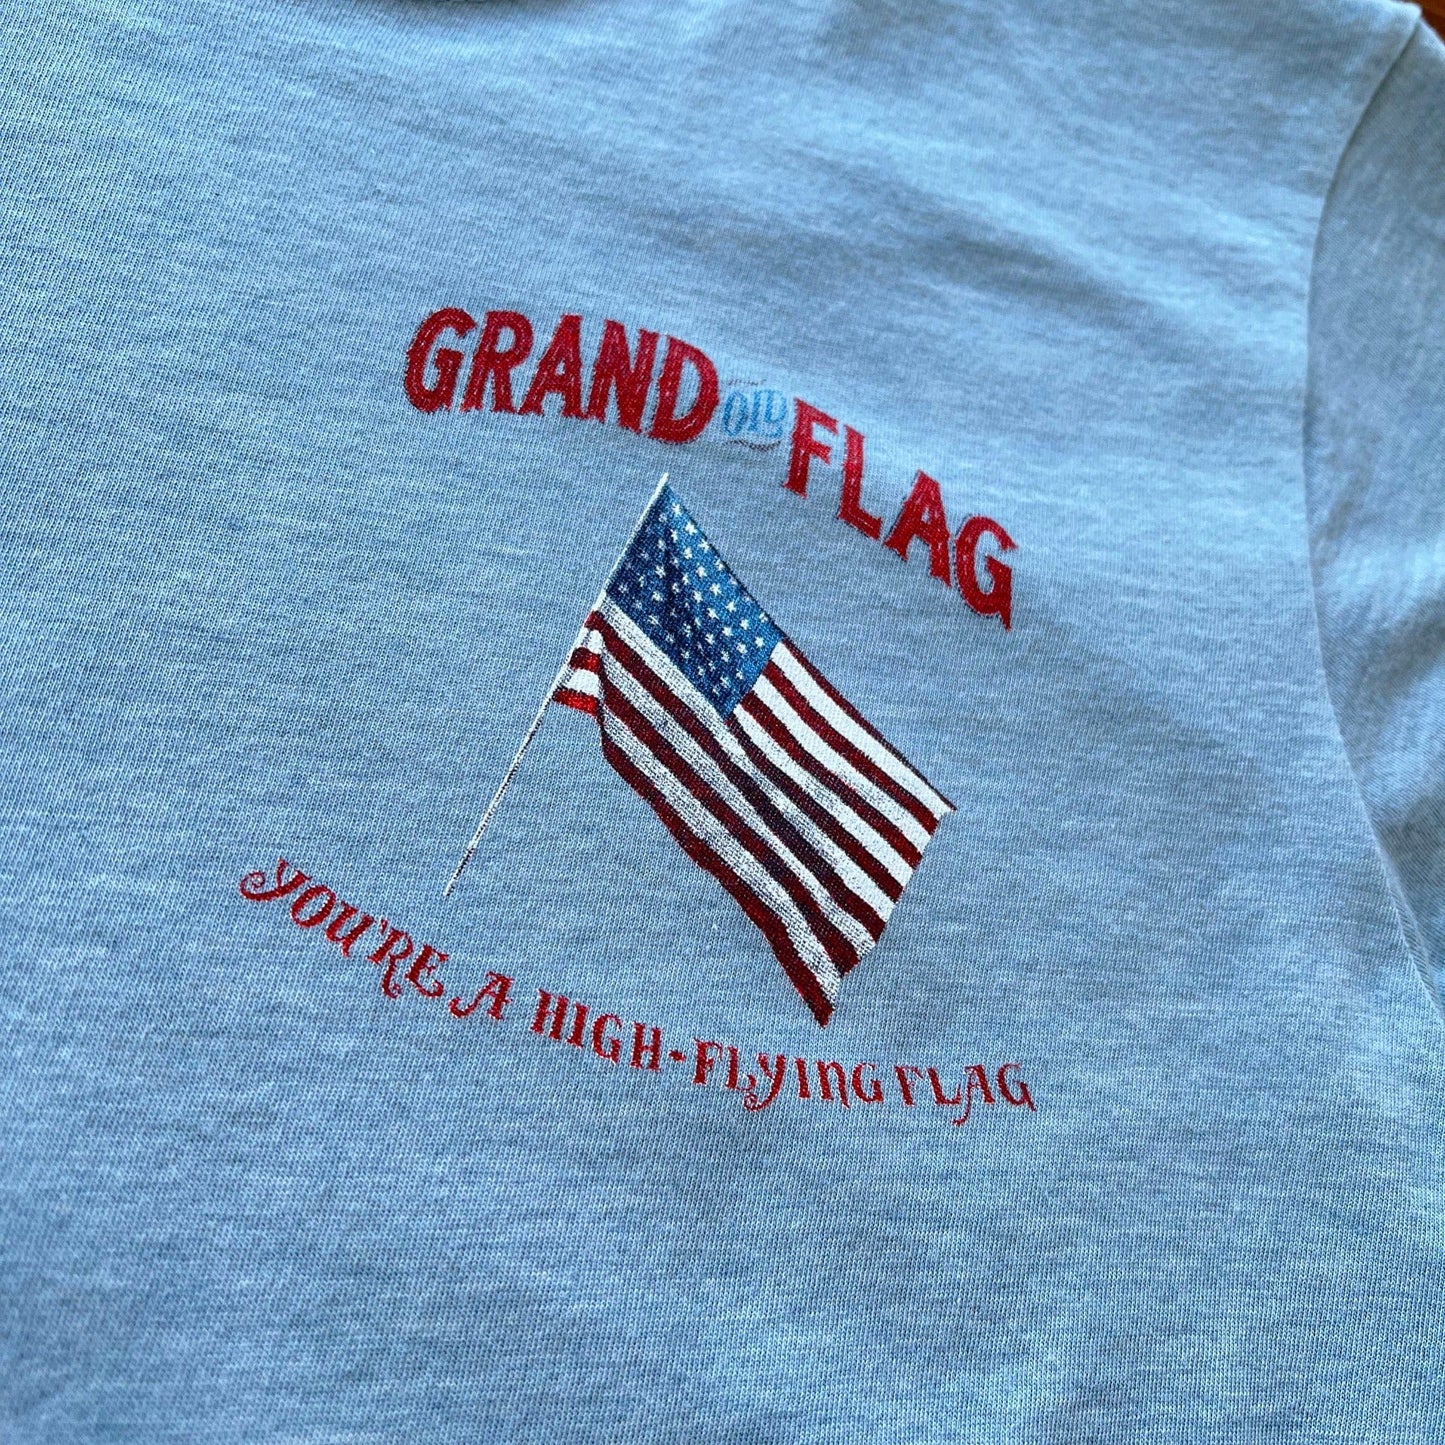 Closeup "Grand Old Flag" Shirt Light blue color front flag design from the history list store